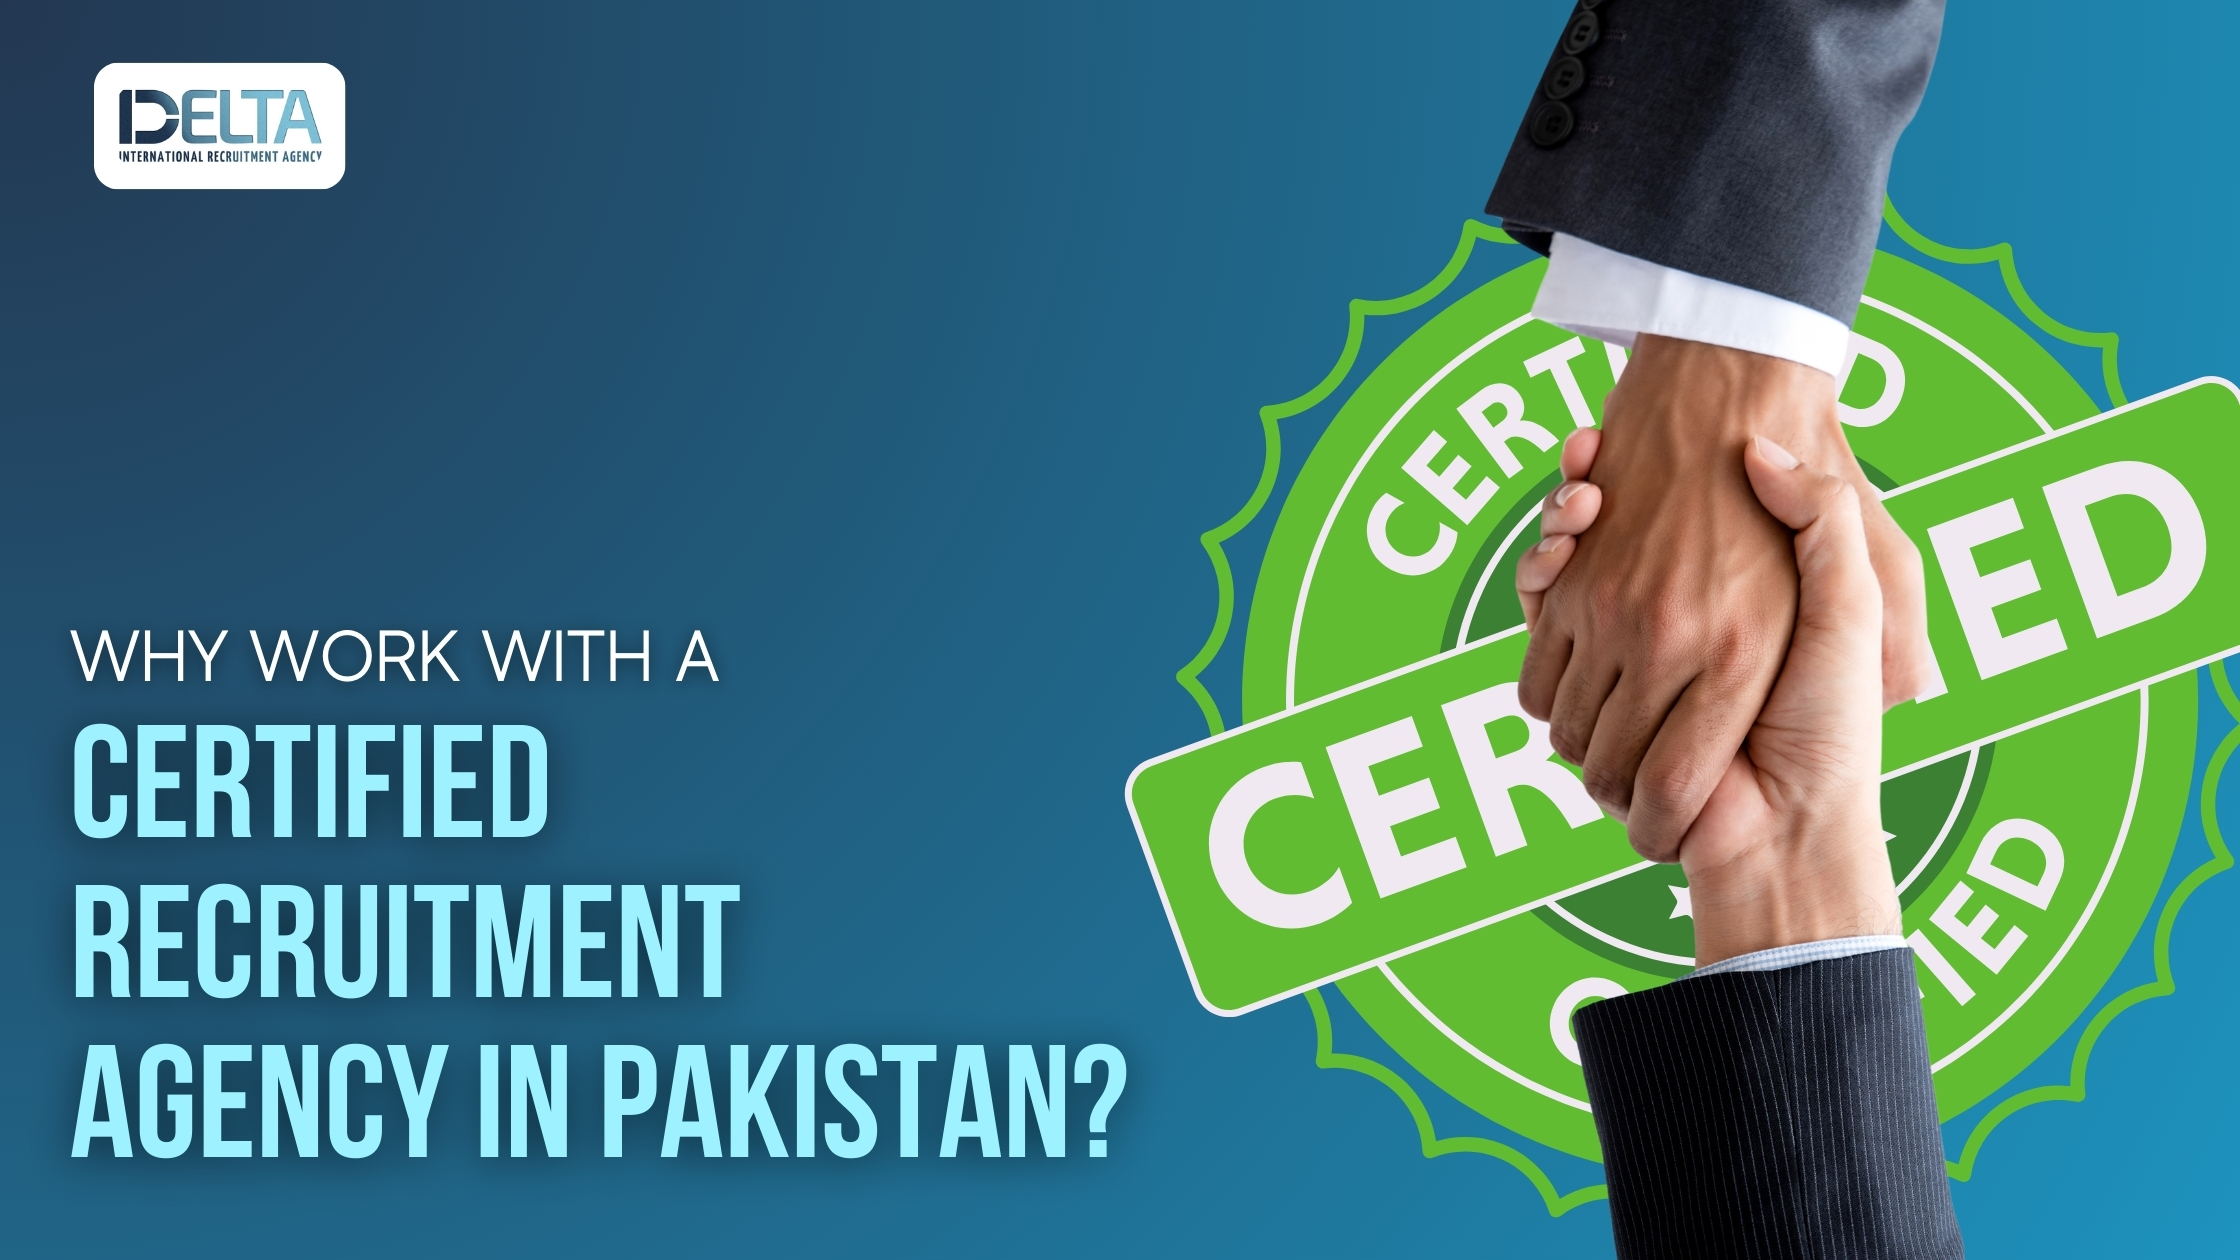 Why Work with a Certified Recruitment Agency in Pakistan?